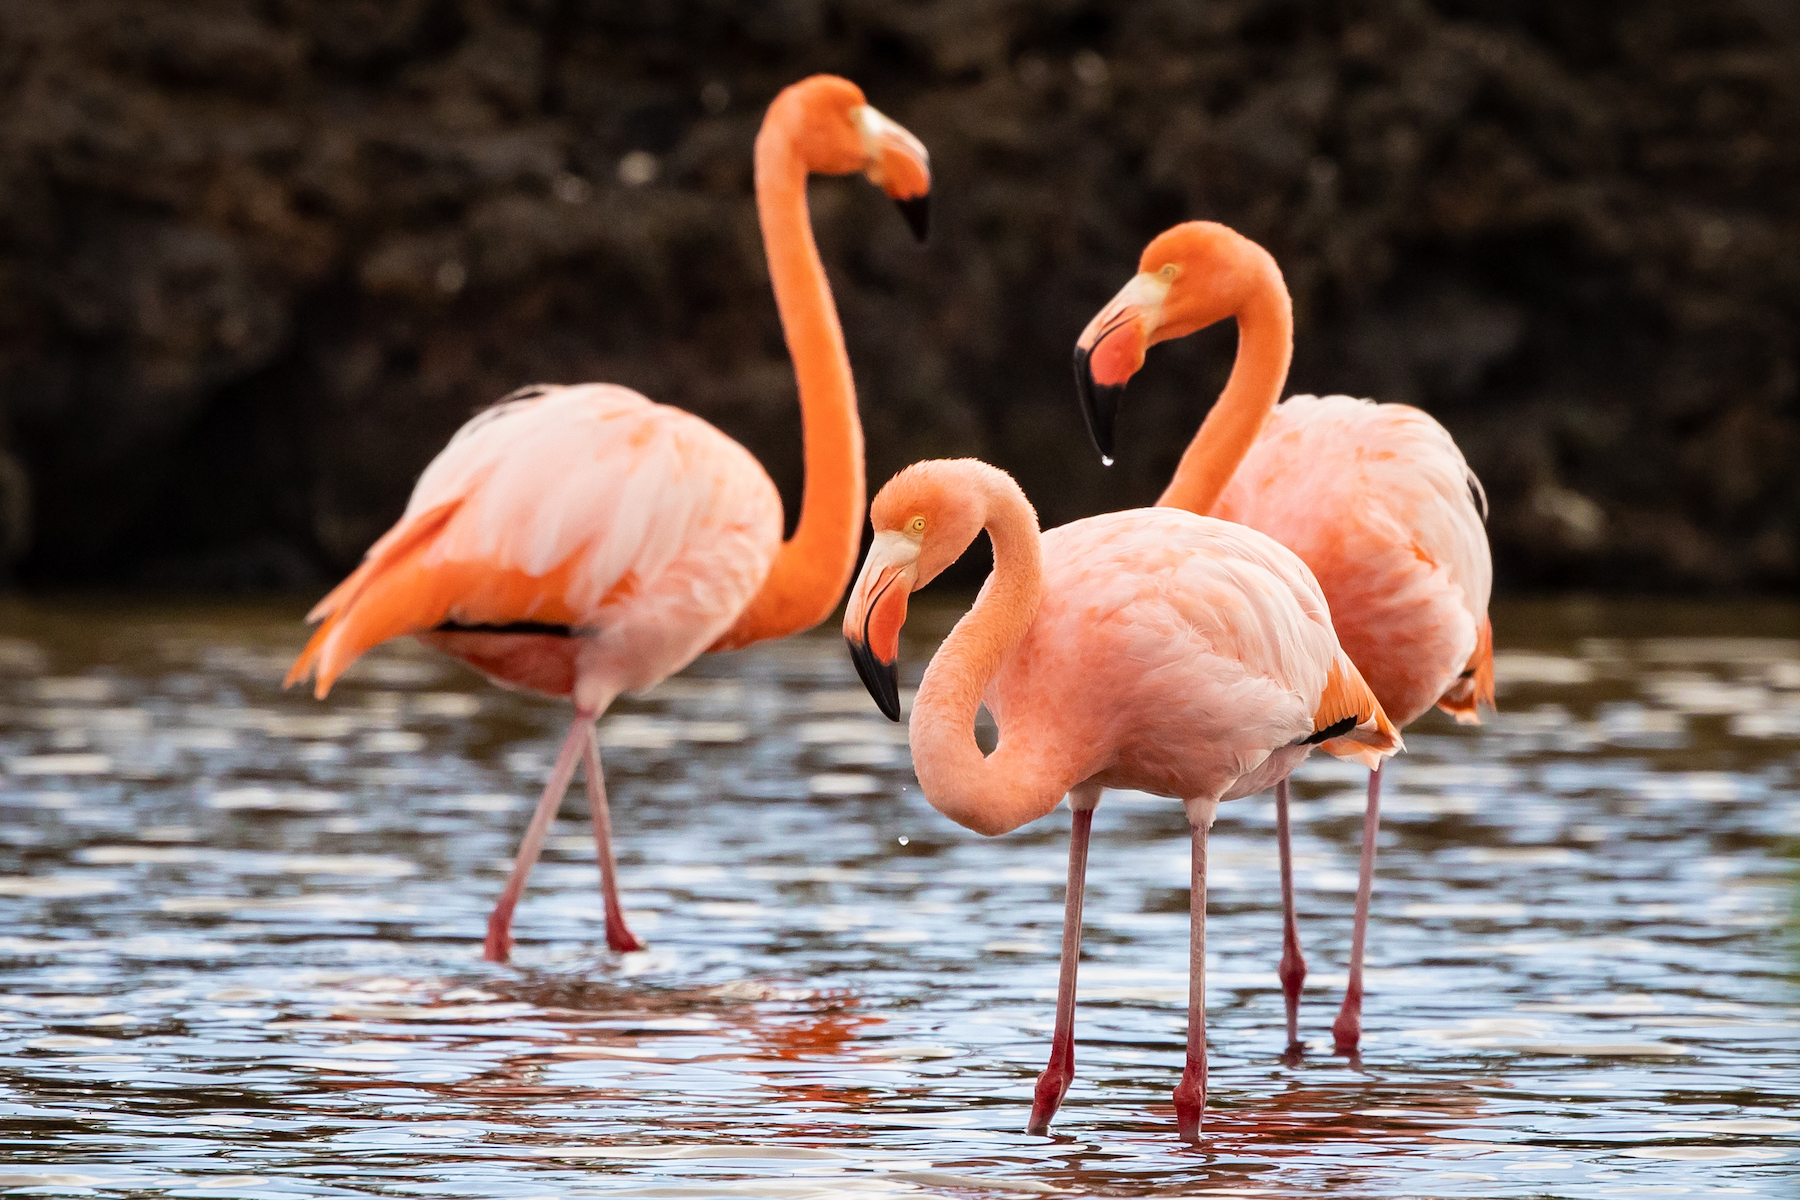 A small flock of Galapagos Flamingos on one of our photography landings in the islands (image by Inger Vandyke)